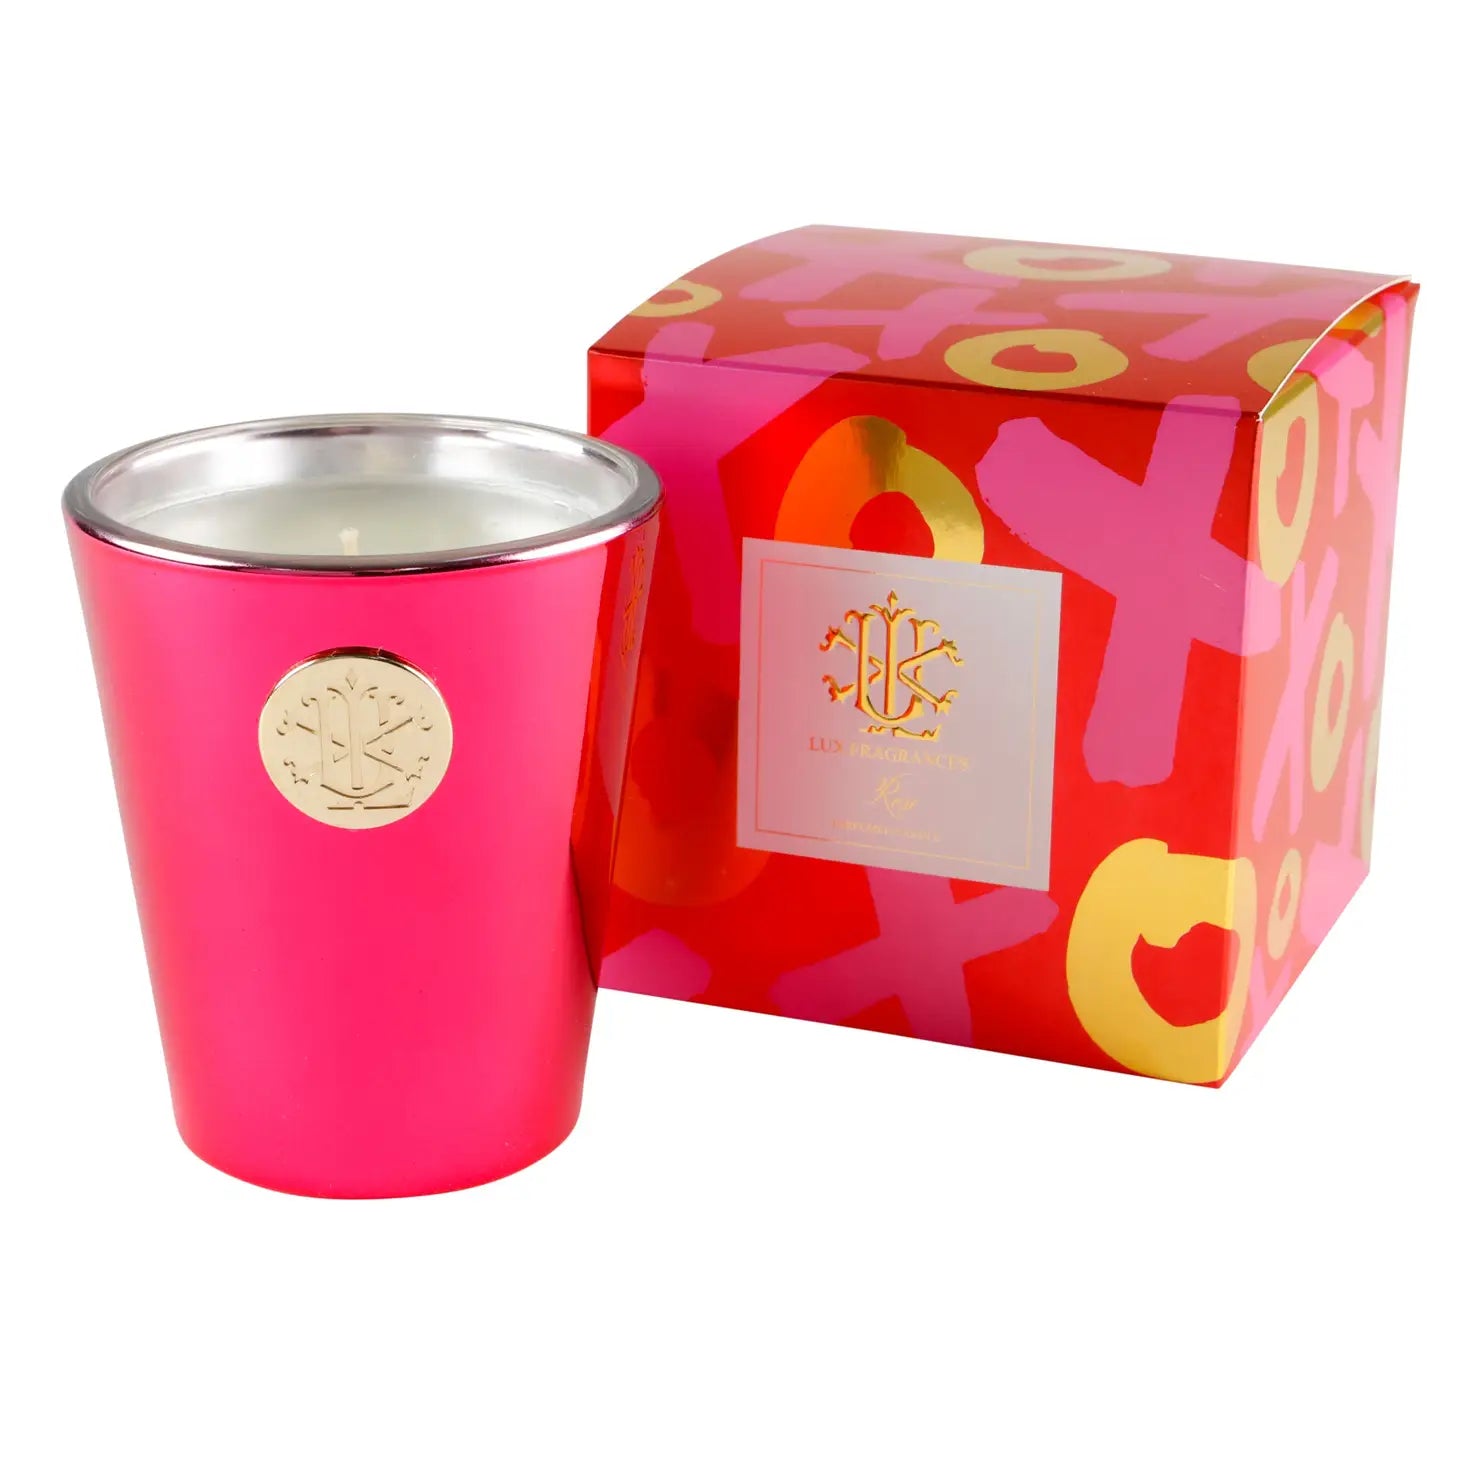 Lux Fragrances Rose Designer Box 8 oz Candle available at The Good Life Boutique